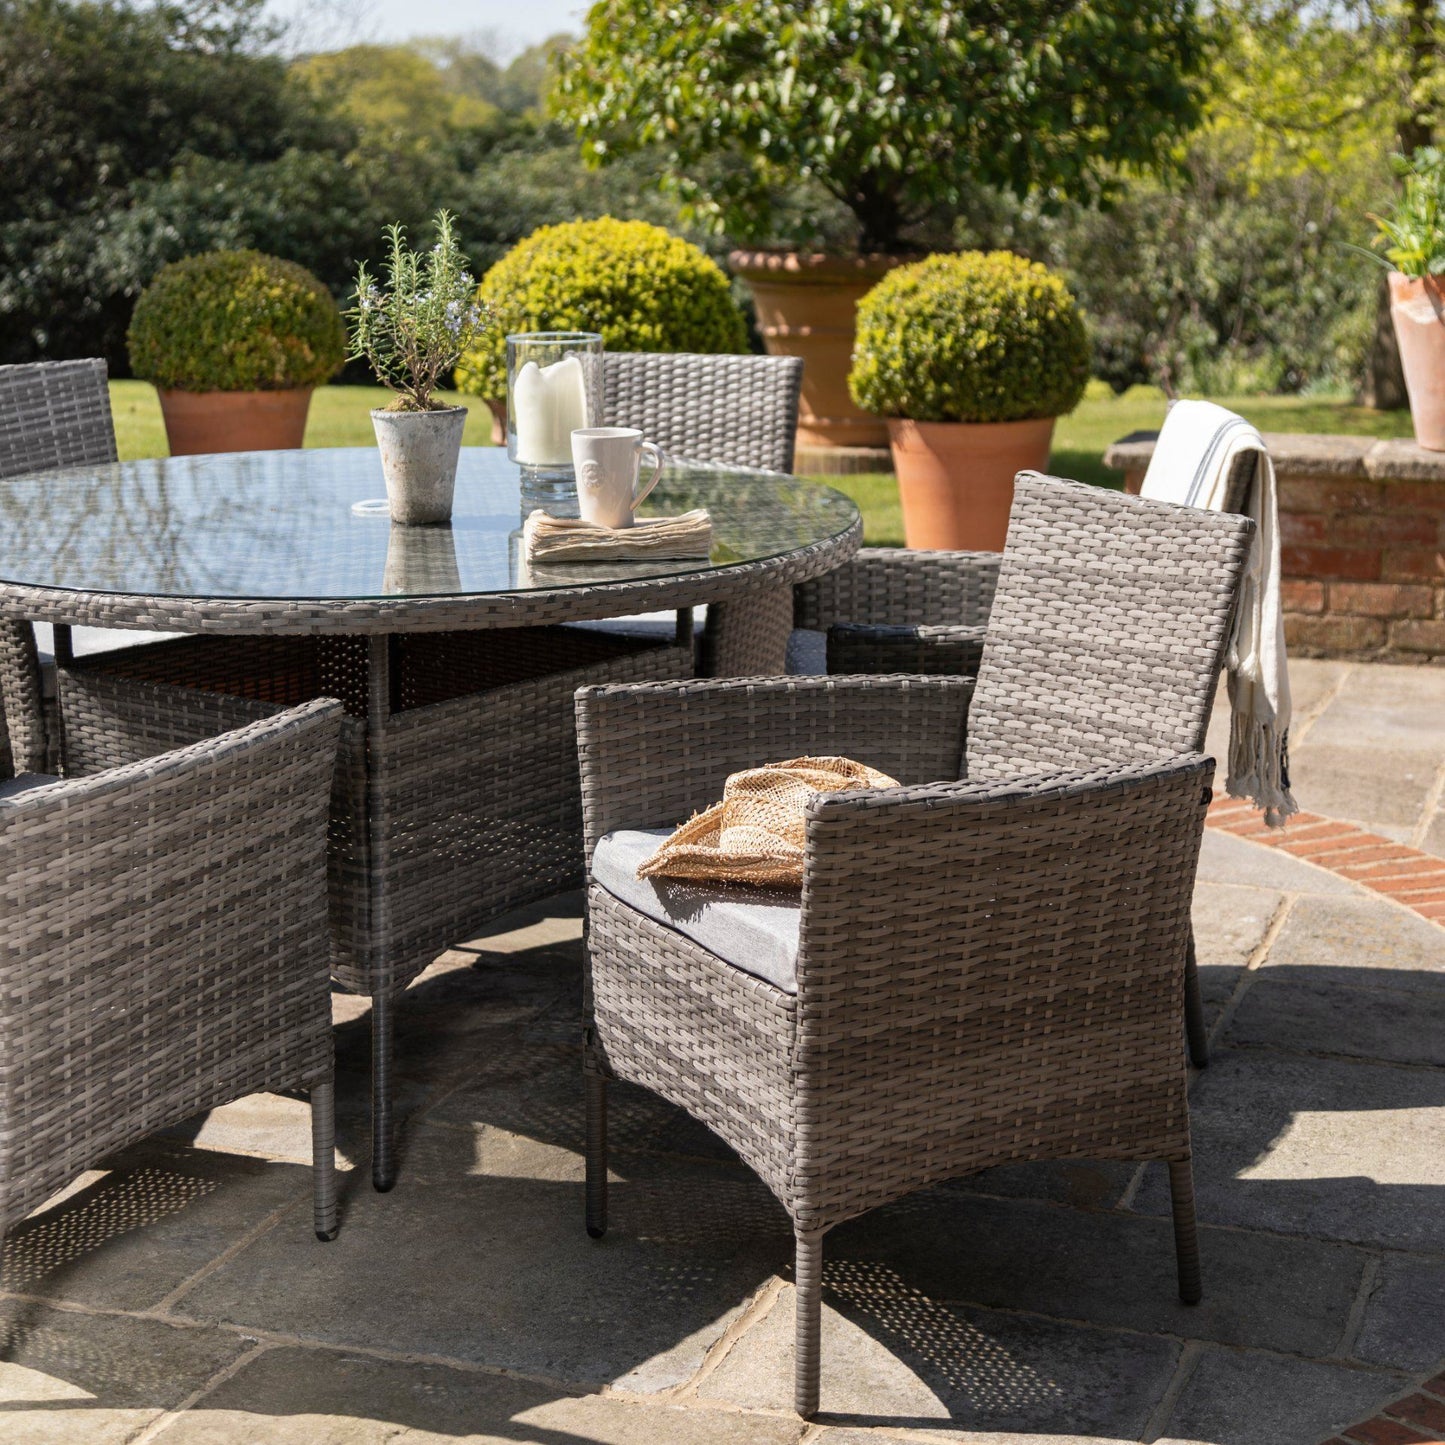 6 Seater Rattan Round Dining Set with Parasol - Rattan Garden Furniture - Grey - In Stock Date - 30th June 2020 - Laura James